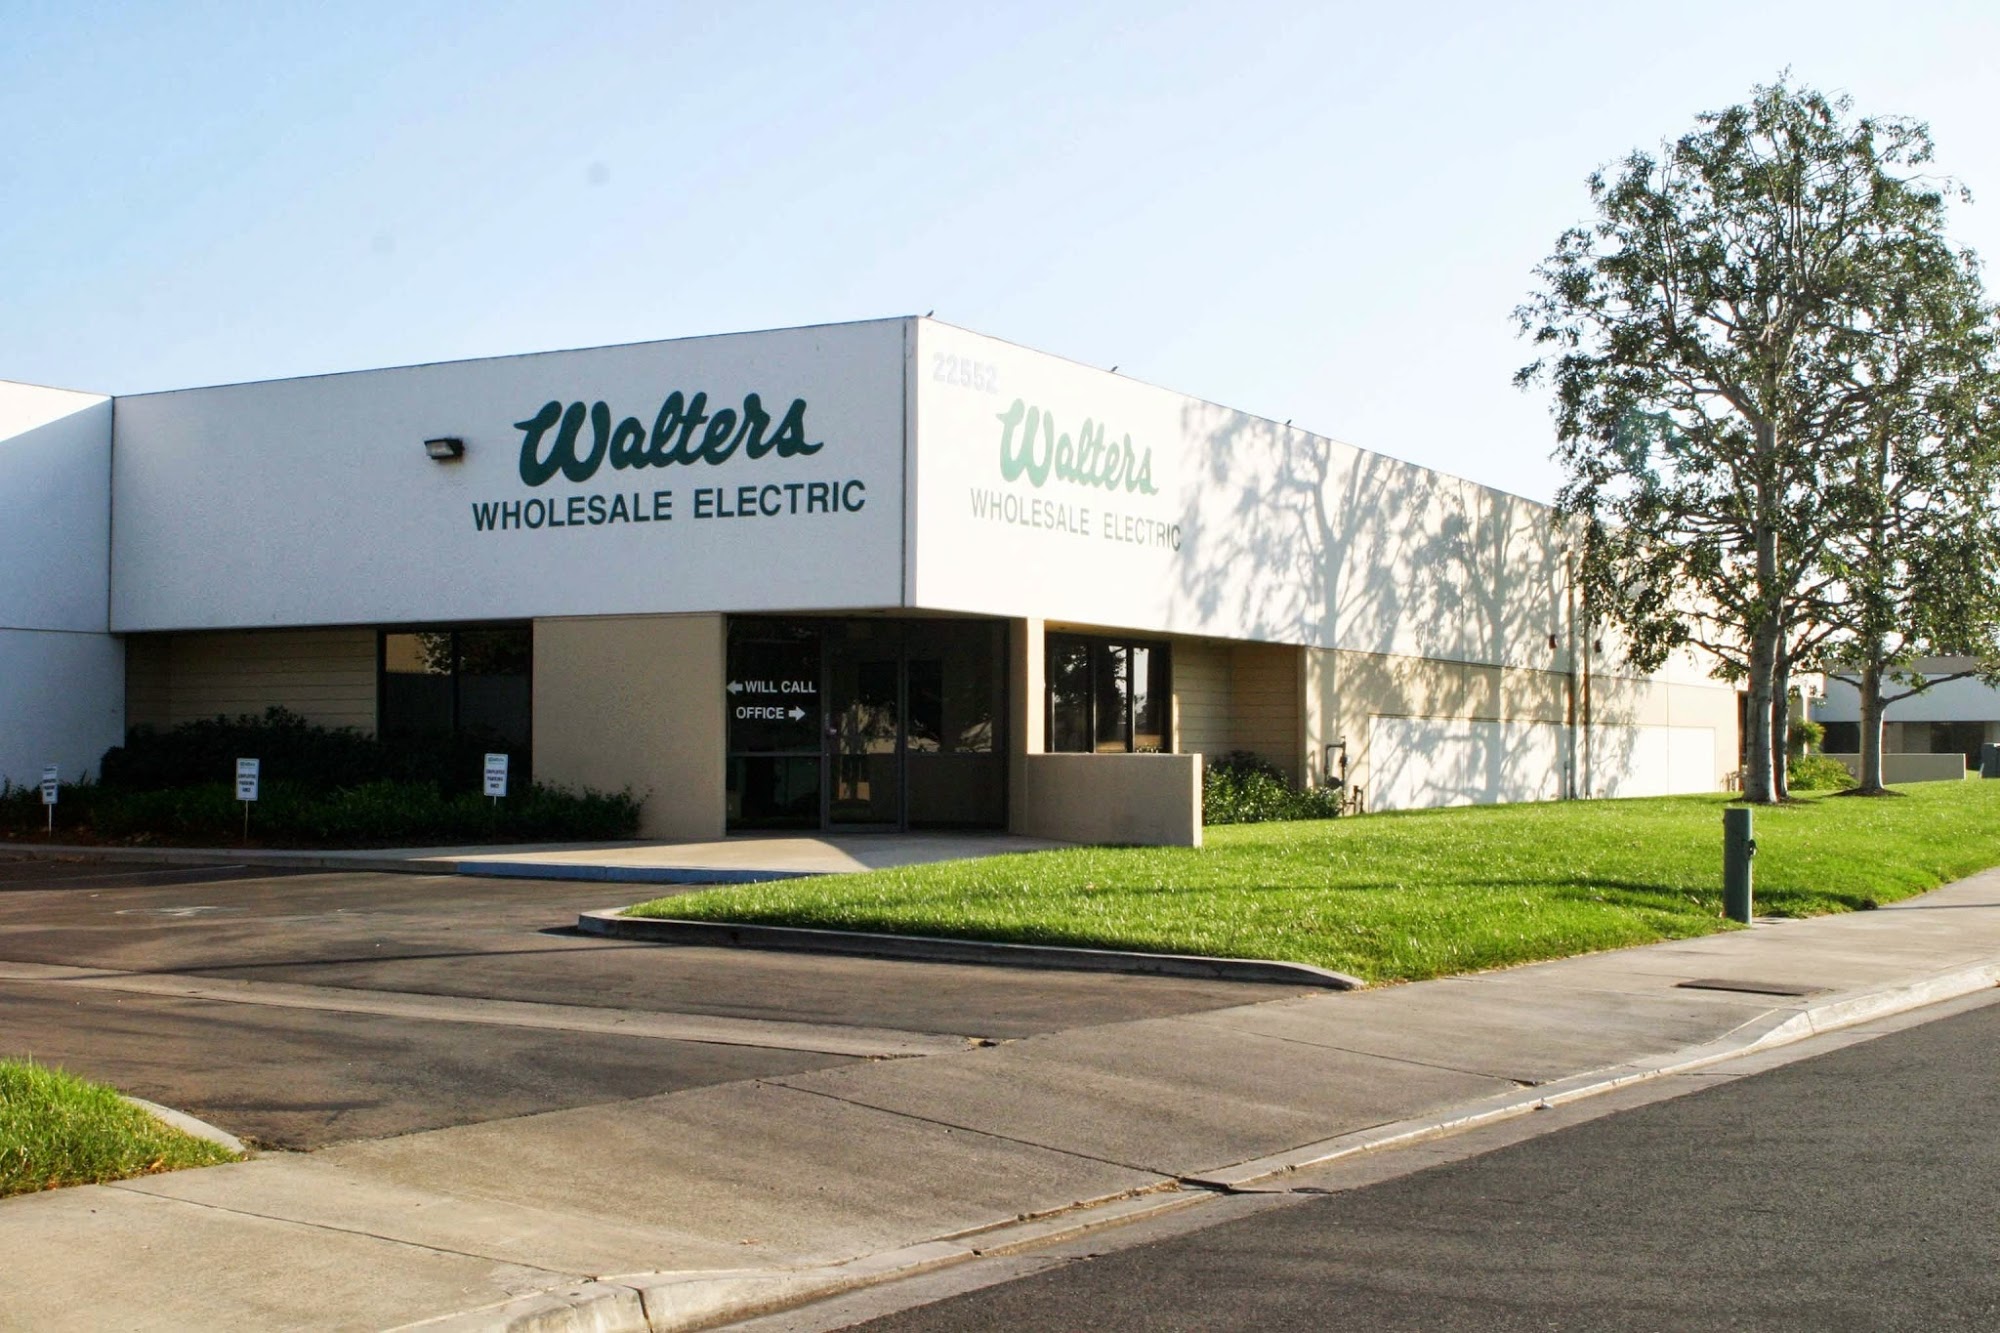 Walters Wholesale Electric Co.